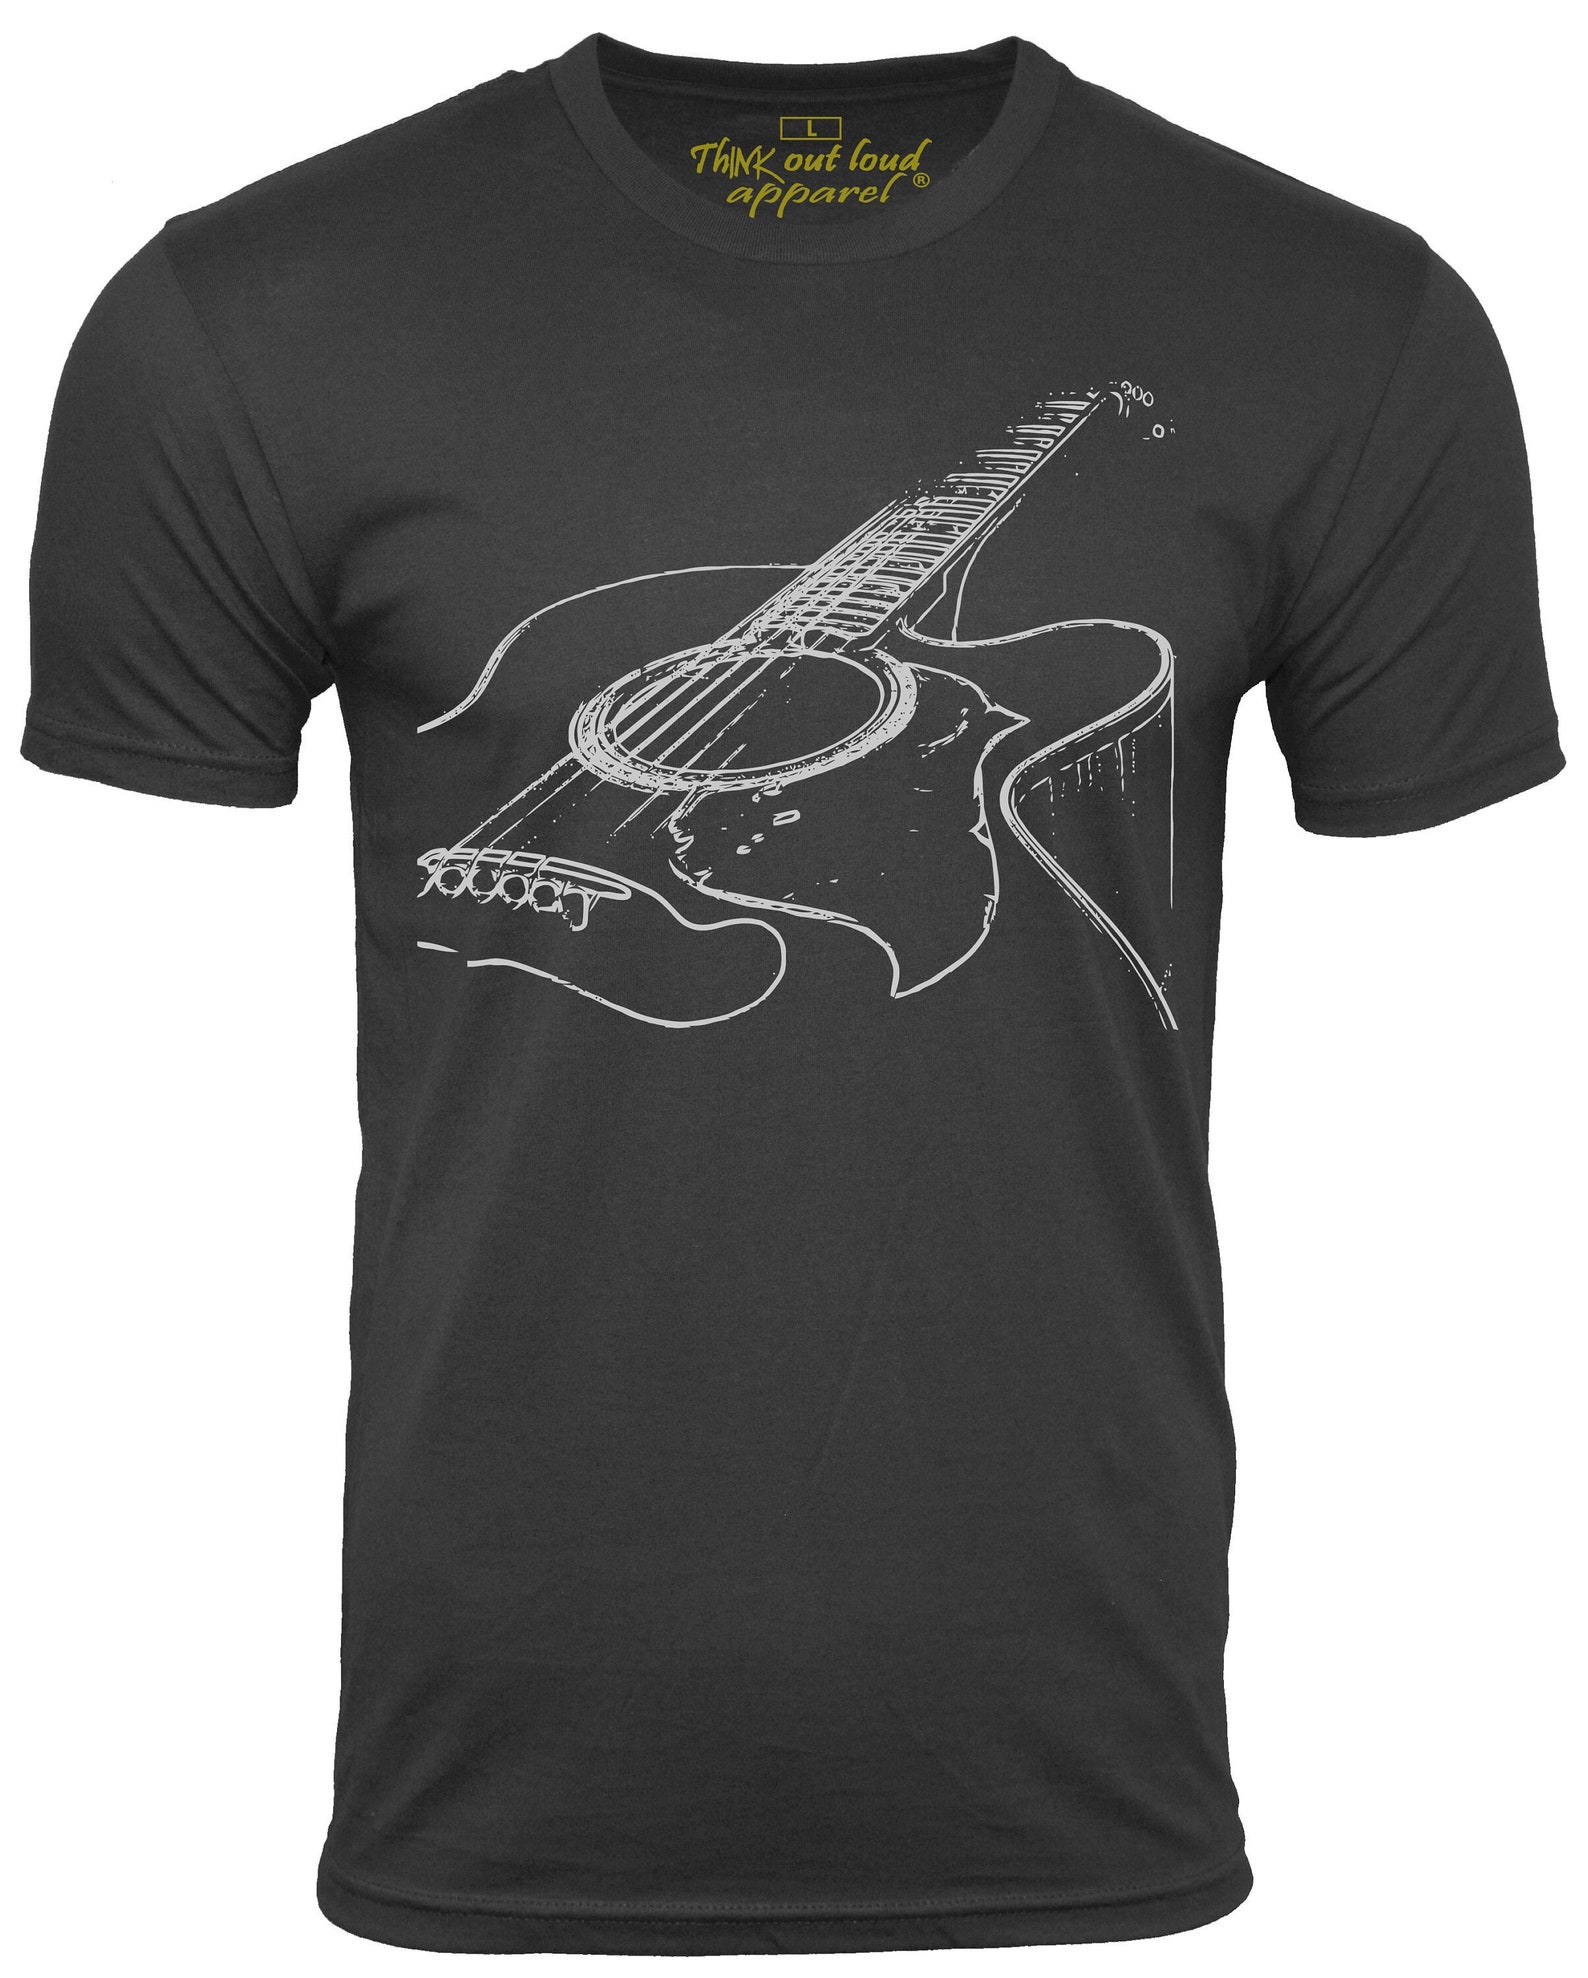 Acoustic Guitar T-shirt Musician Tee Think Out Loud Apparel - Etsy